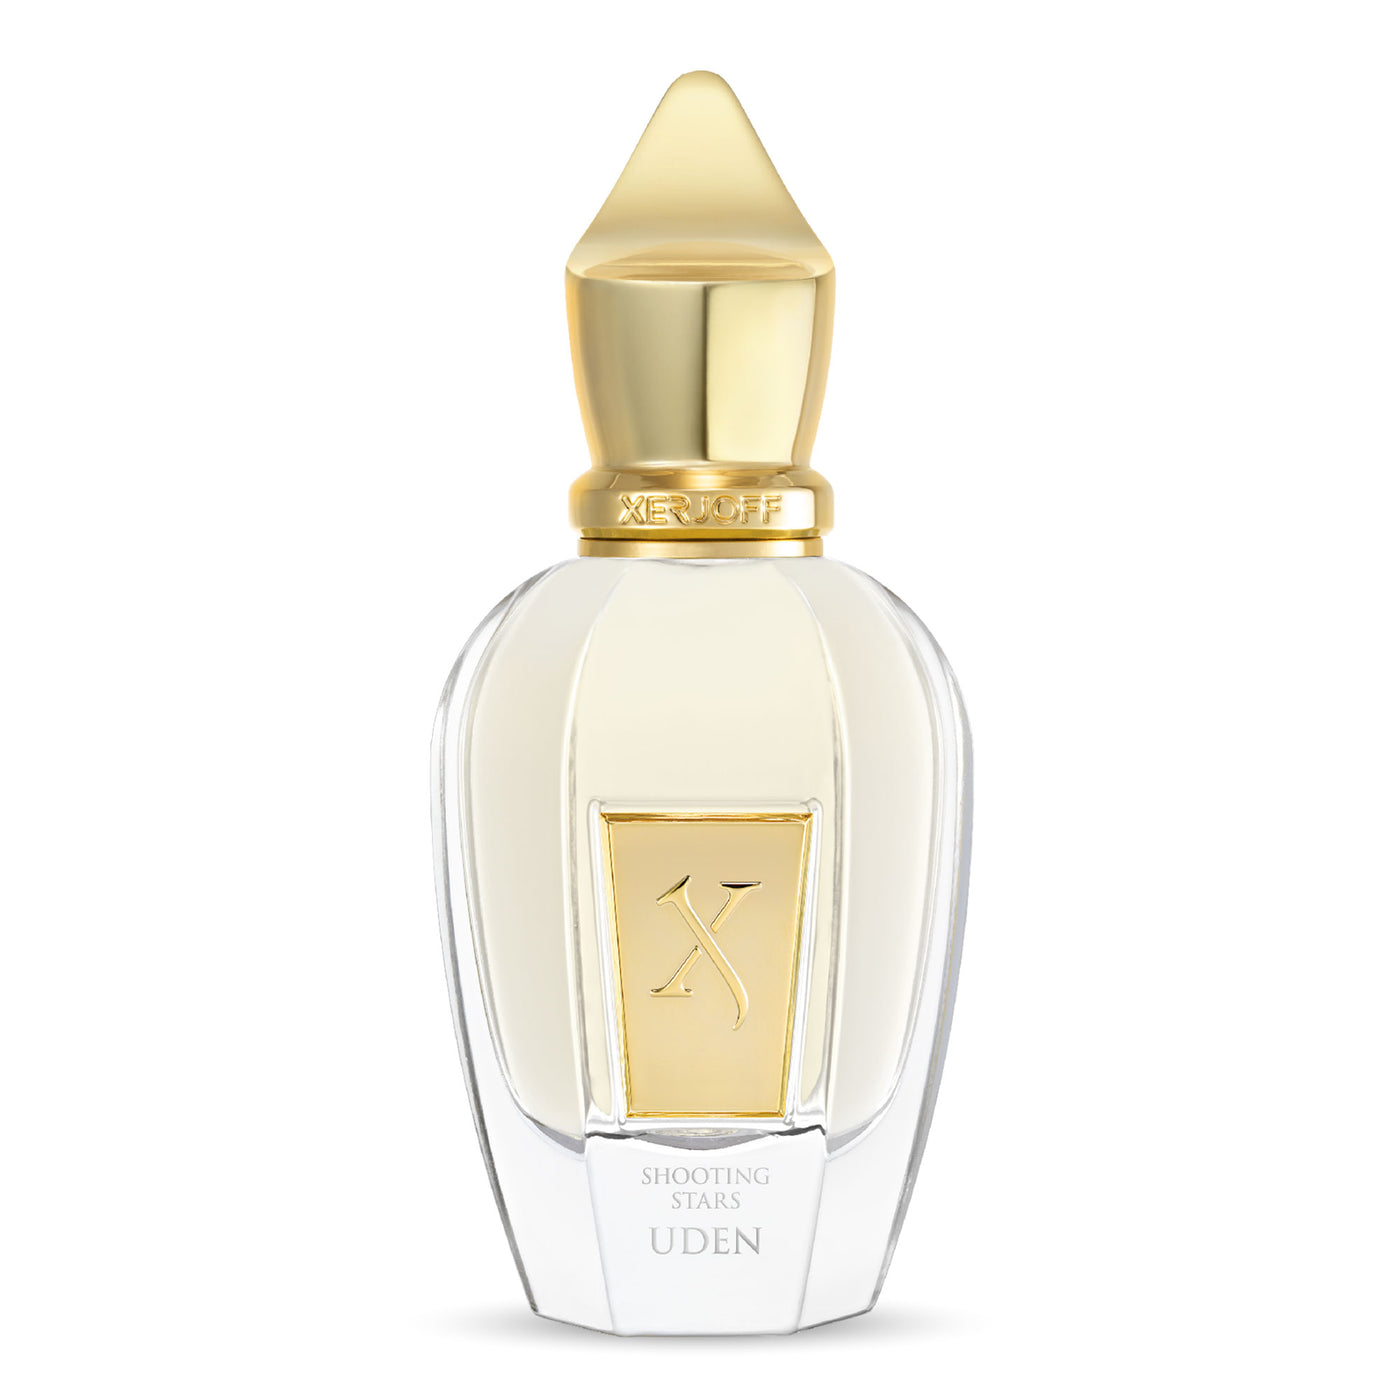 Shooting Star - UDEN - 50ml - Gharyal by Collectibles 